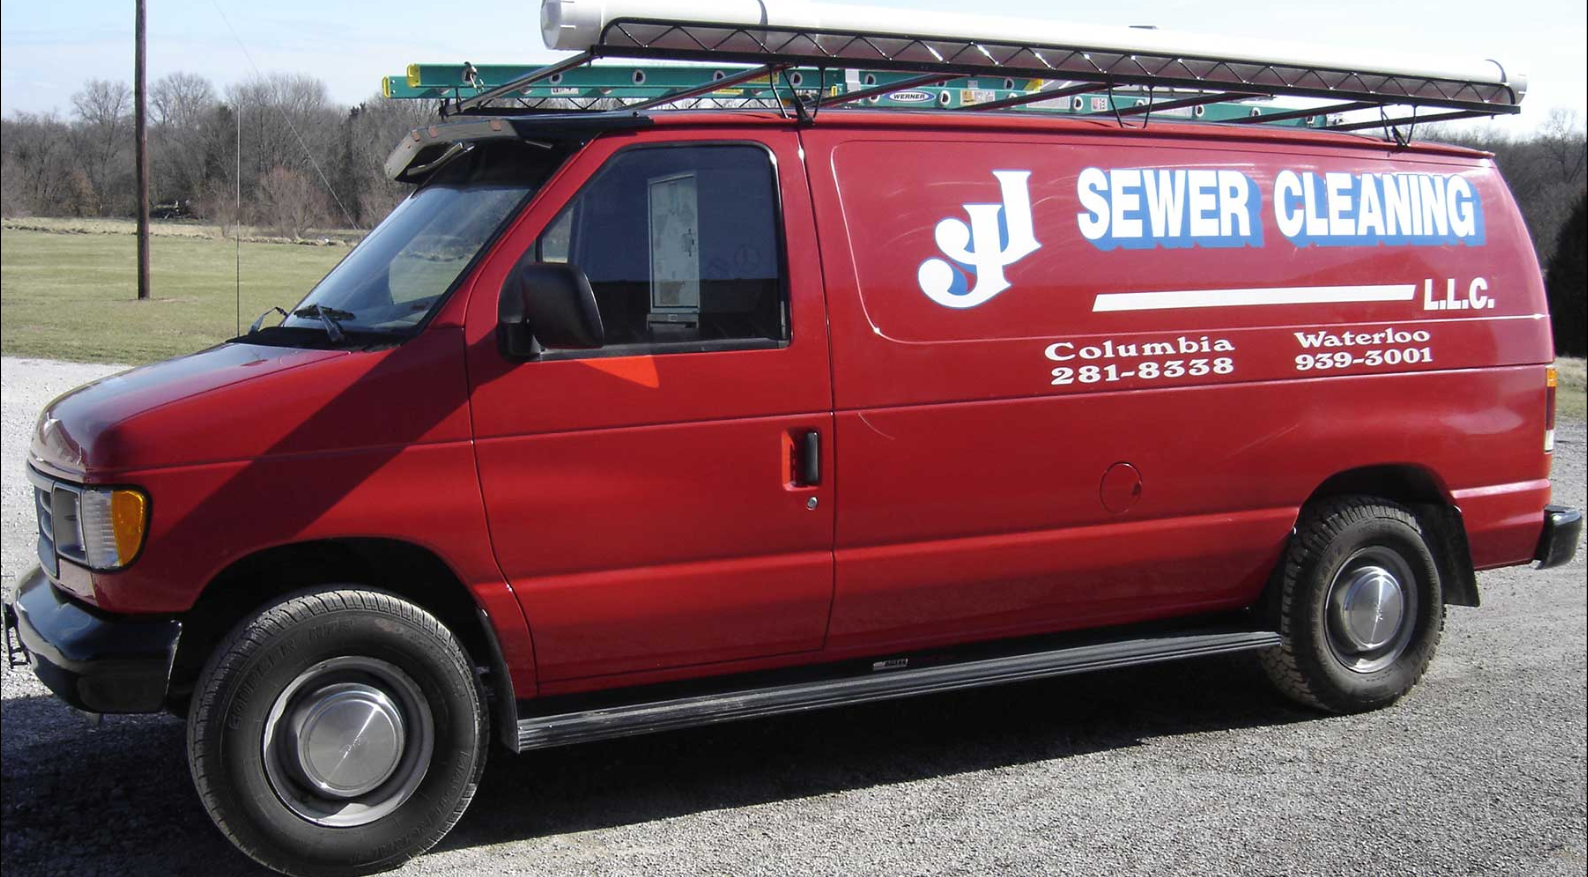 J & J Septic & Sewer Cleaning 5574 Sportsman Rd, Waterloo Illinois 62298